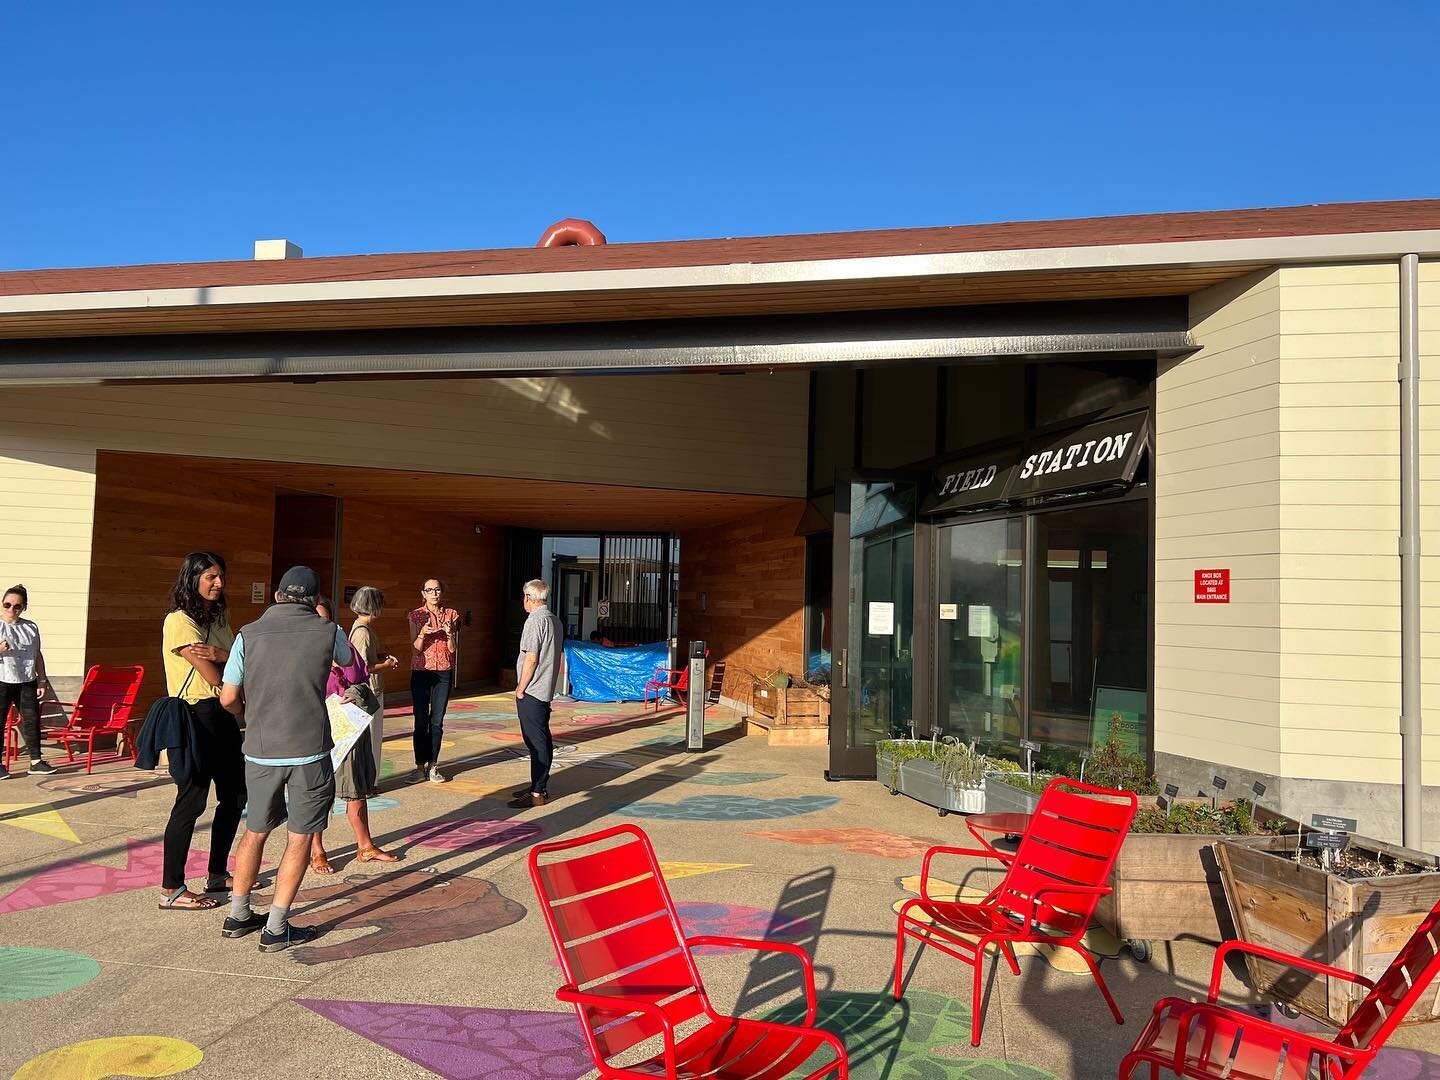 Last week AEL faculty Chris Falliers, Margaret Ikeda, Evan Jones, Adam Marcus, and Leslie Carol Roberts visited the new Field Station at Presidio Tunnel Tops Park, a beautiful new youth education center built as part of the Presidio&rsquo;s incredibl